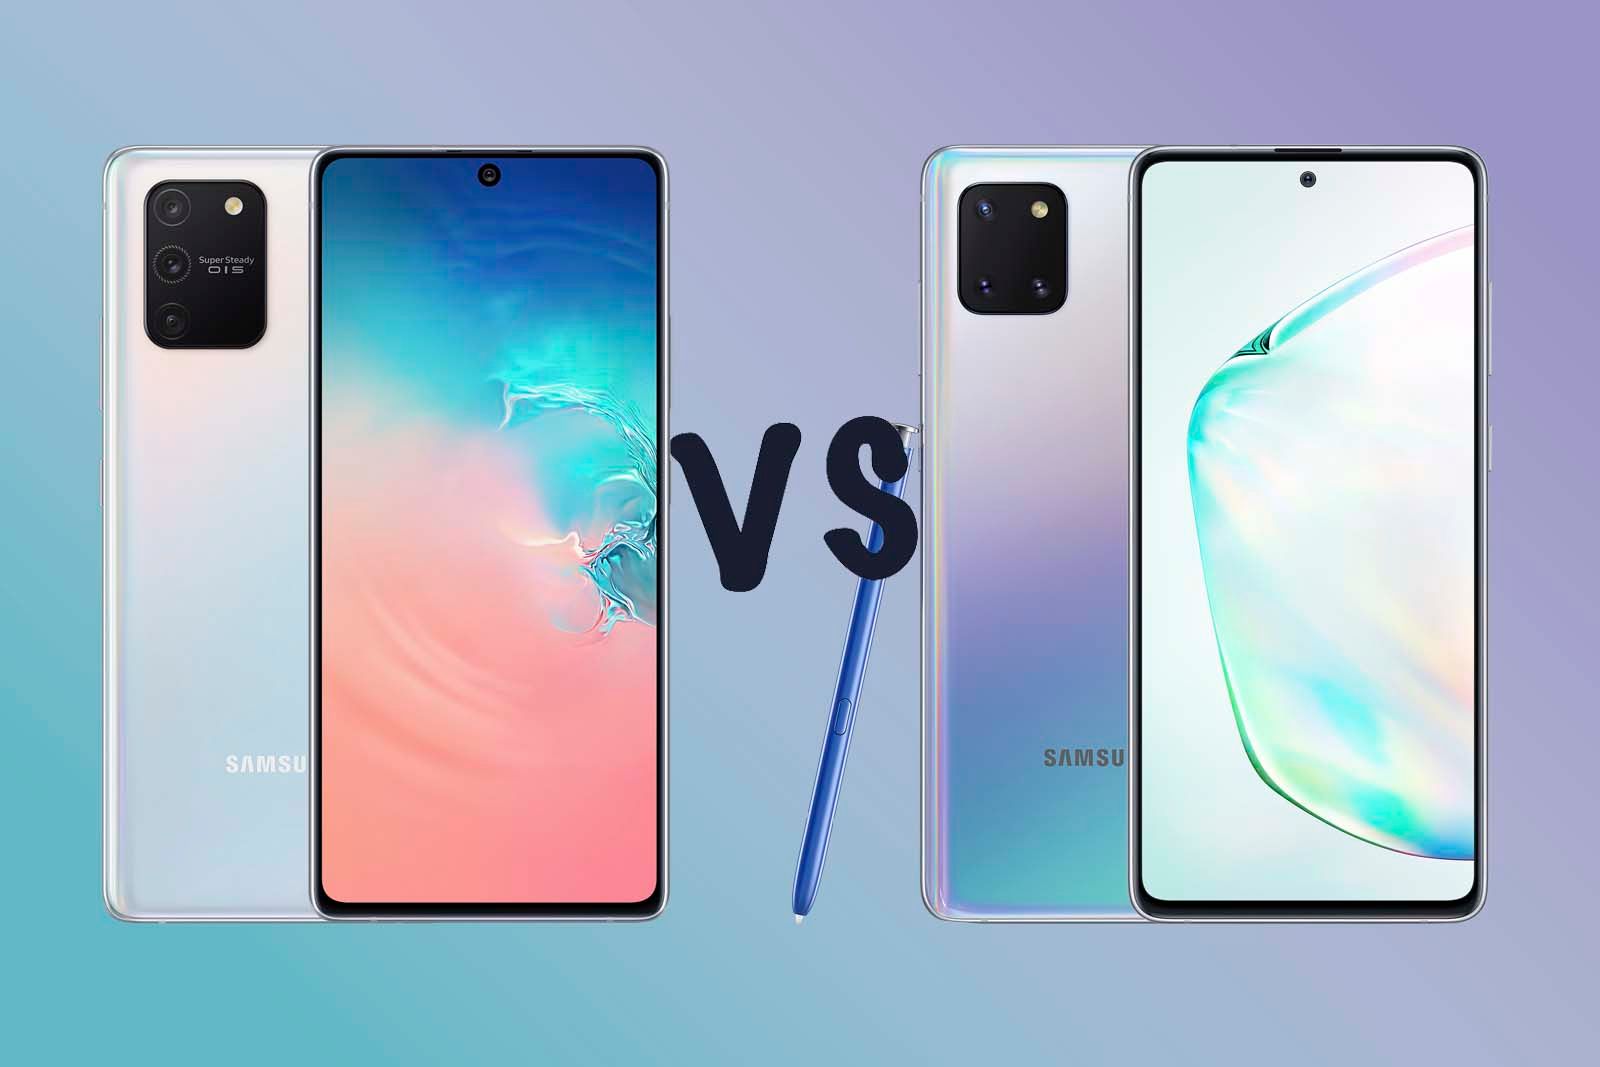 What is the difference between the Note10 and Note10 lite?